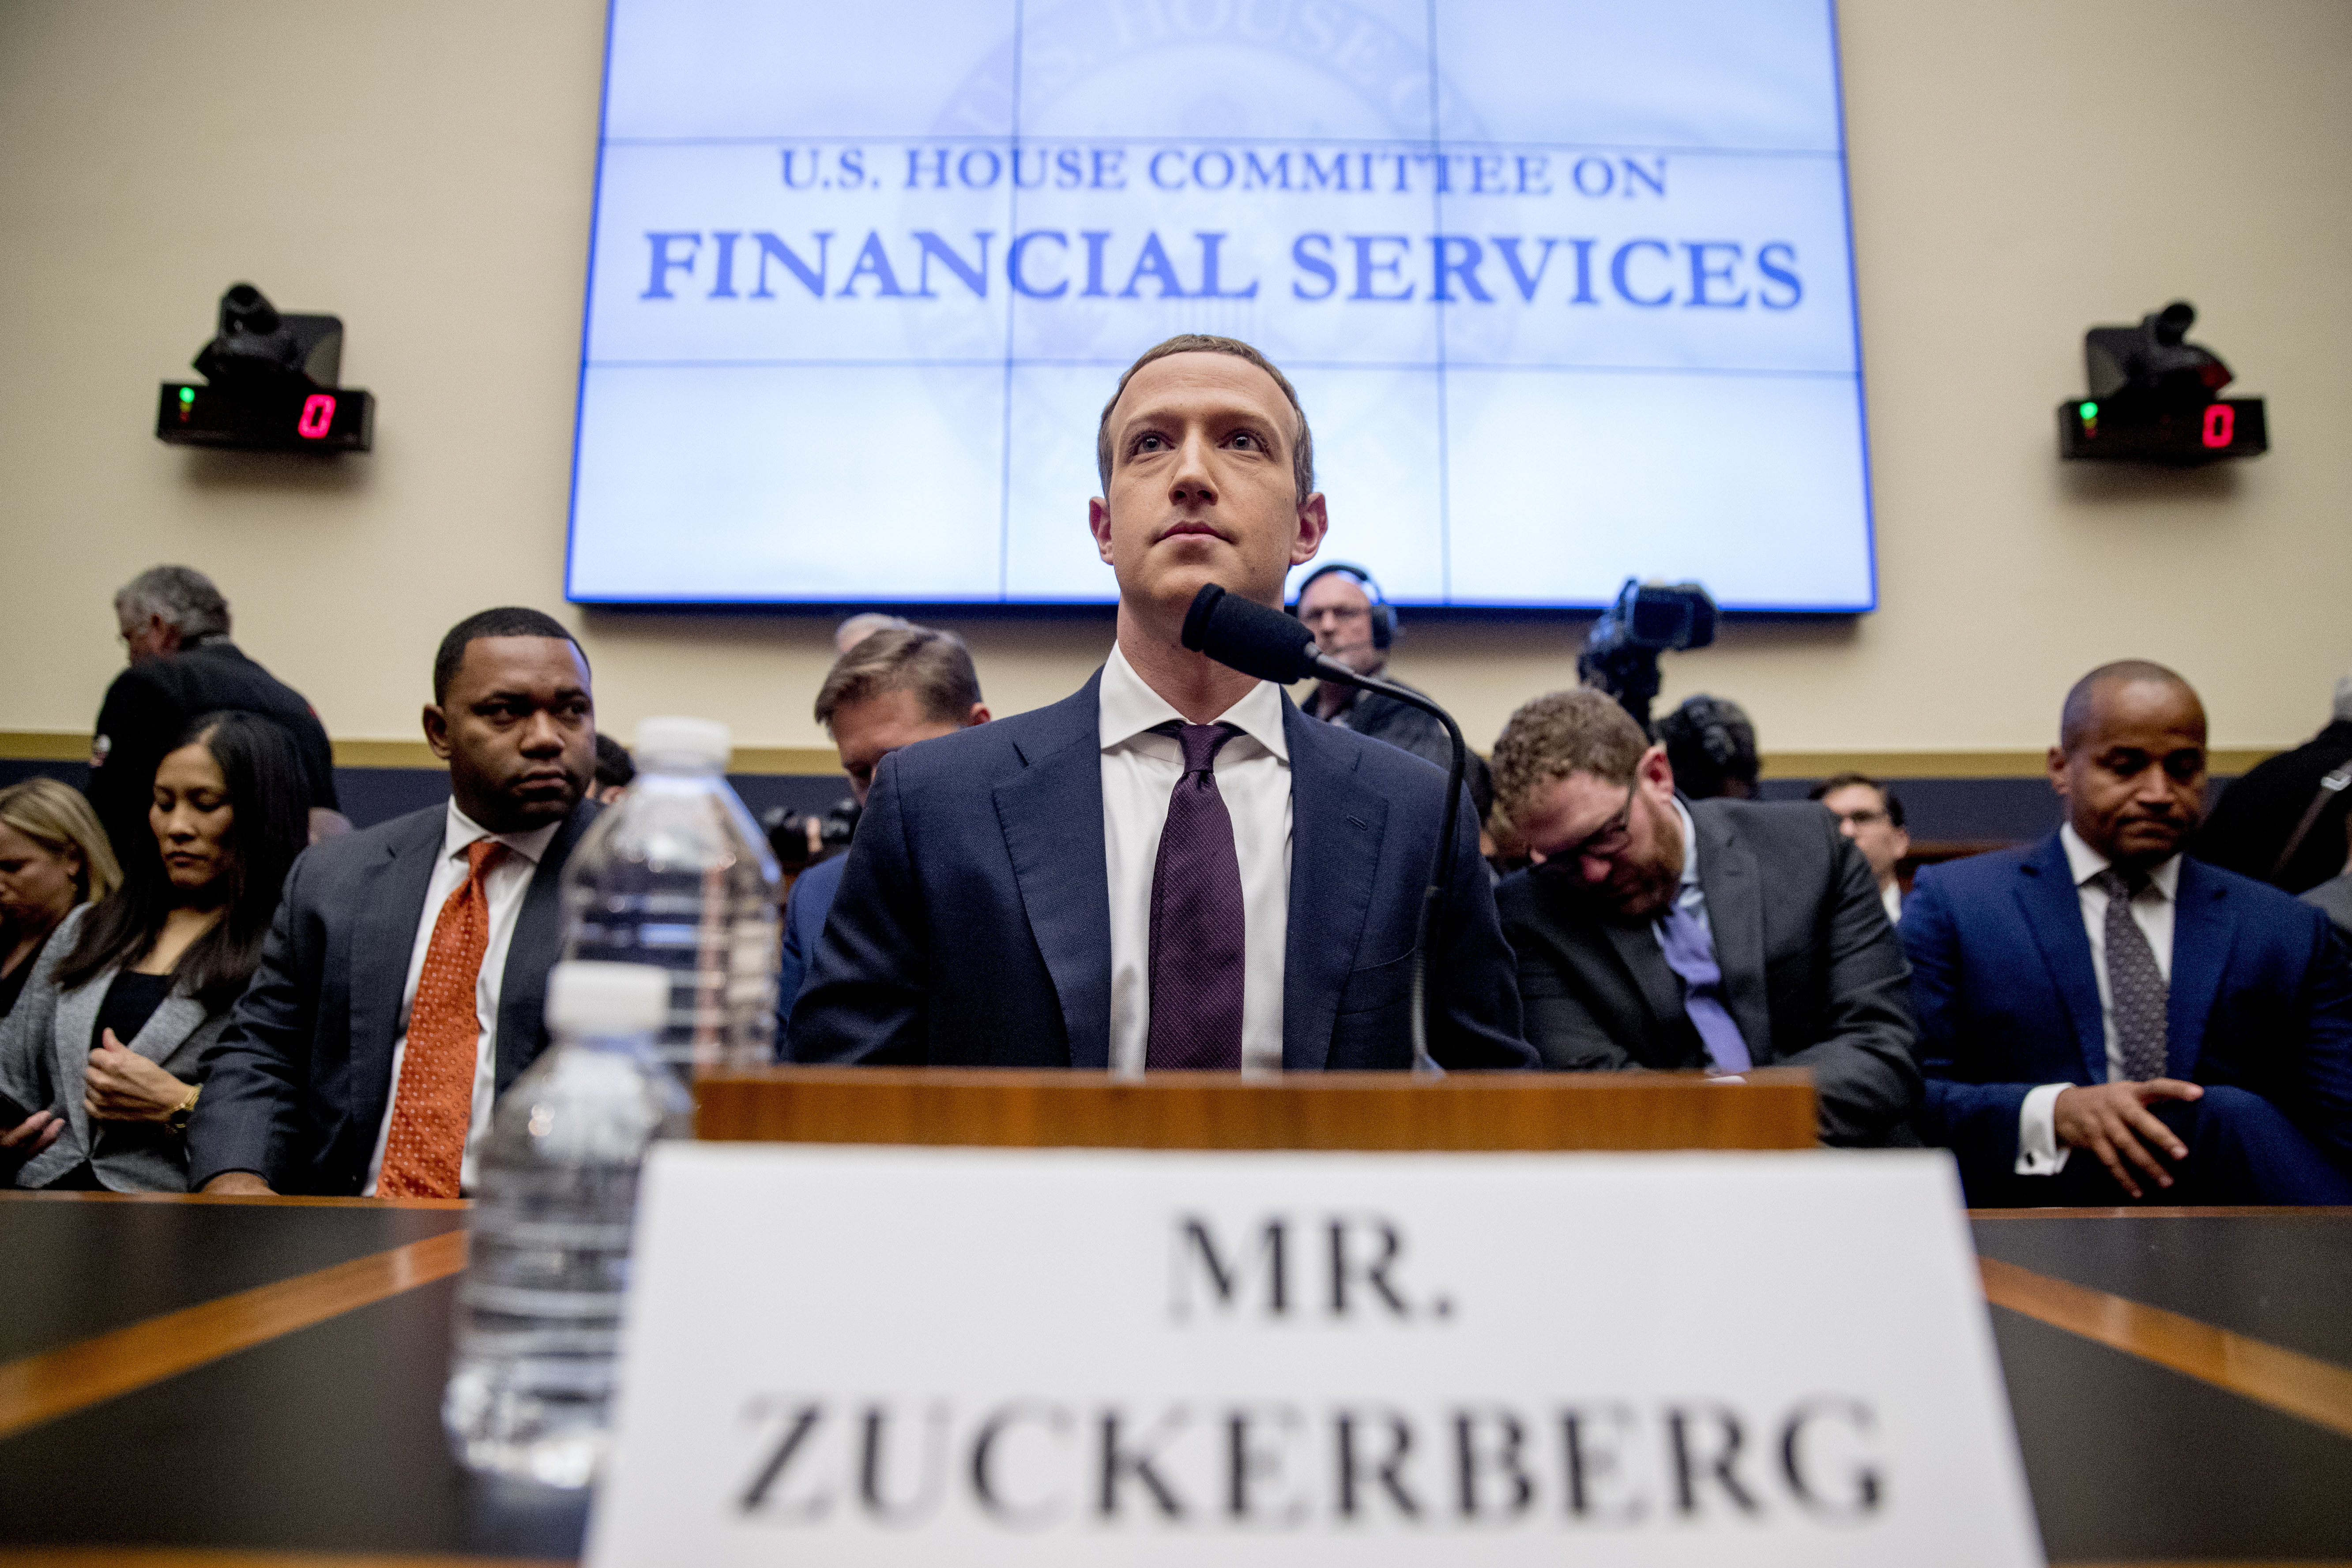 Facebook CEO Mark Zuckerberg has given evidence to Congress on the company&#039;s business several times, including at this hearing in October 2019.